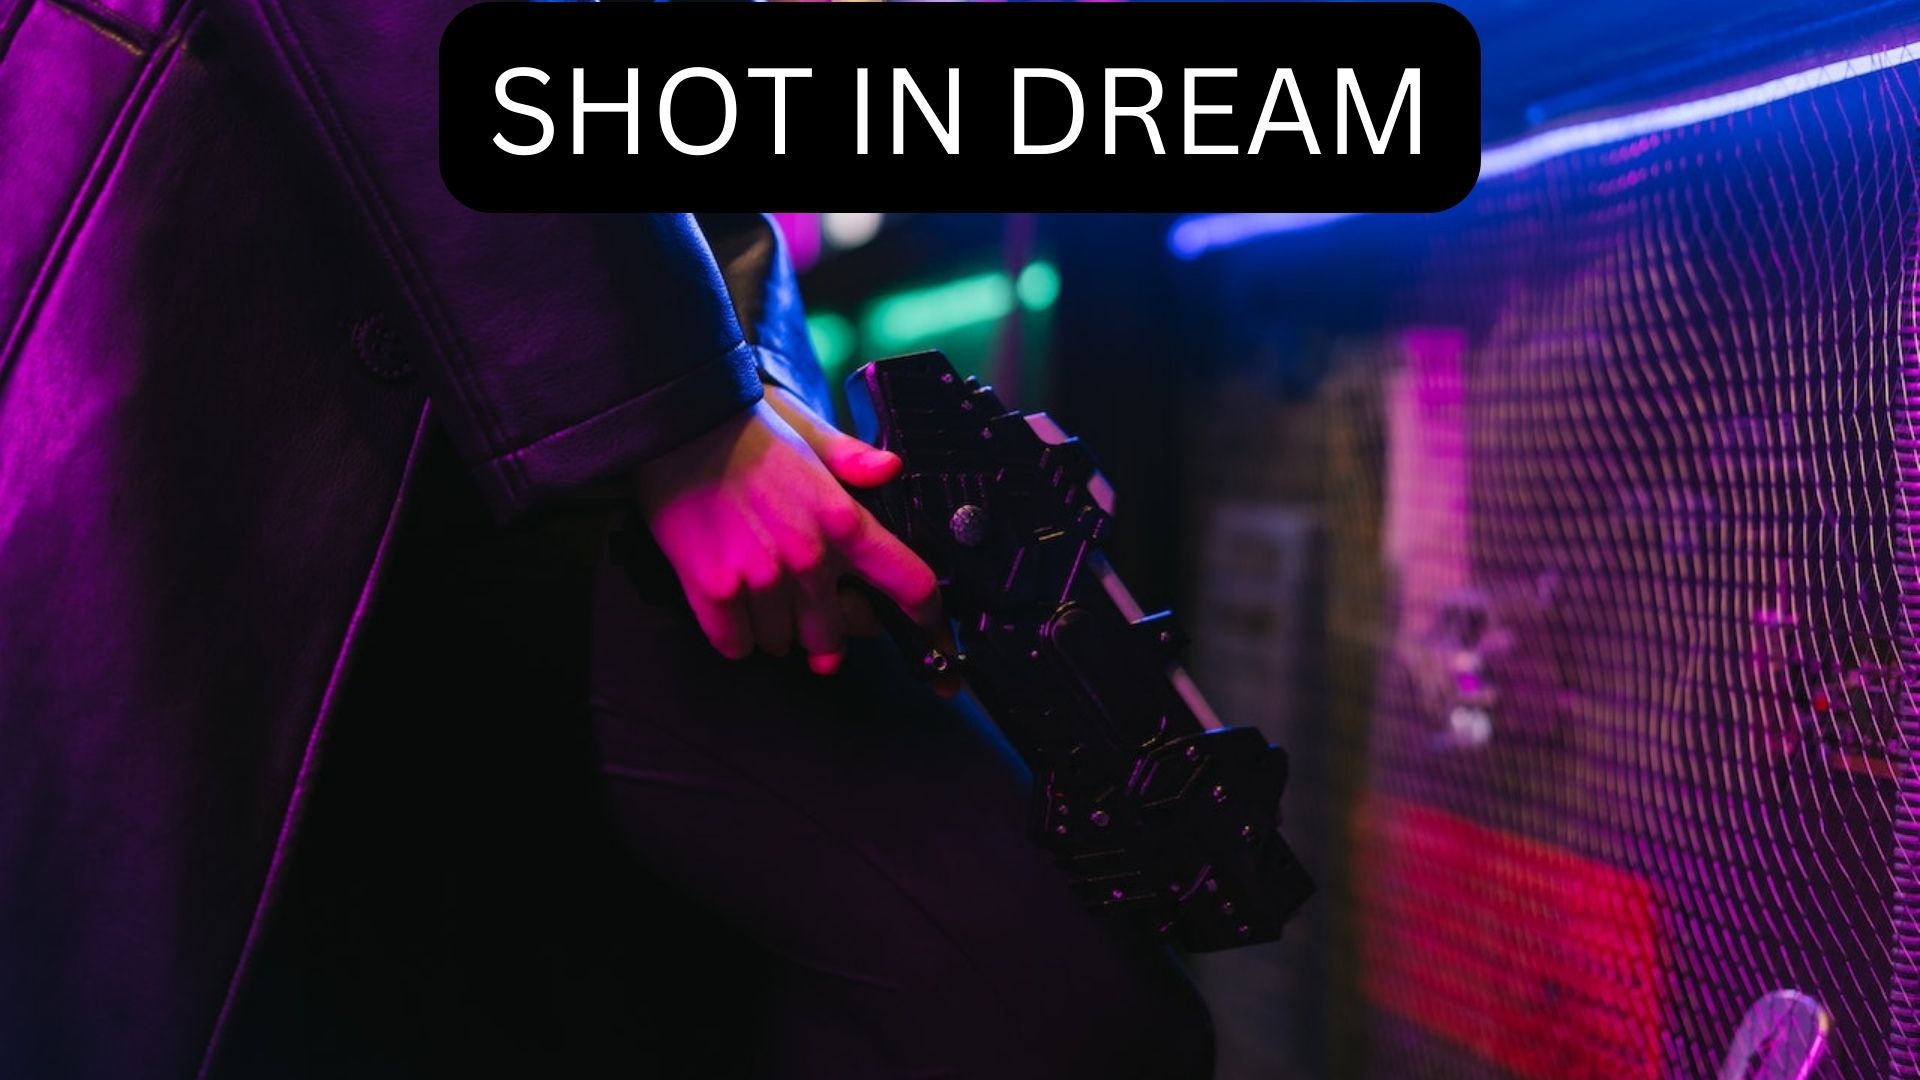 Shot In Dream - Fear, Aggression, Anger, And Potential Danger